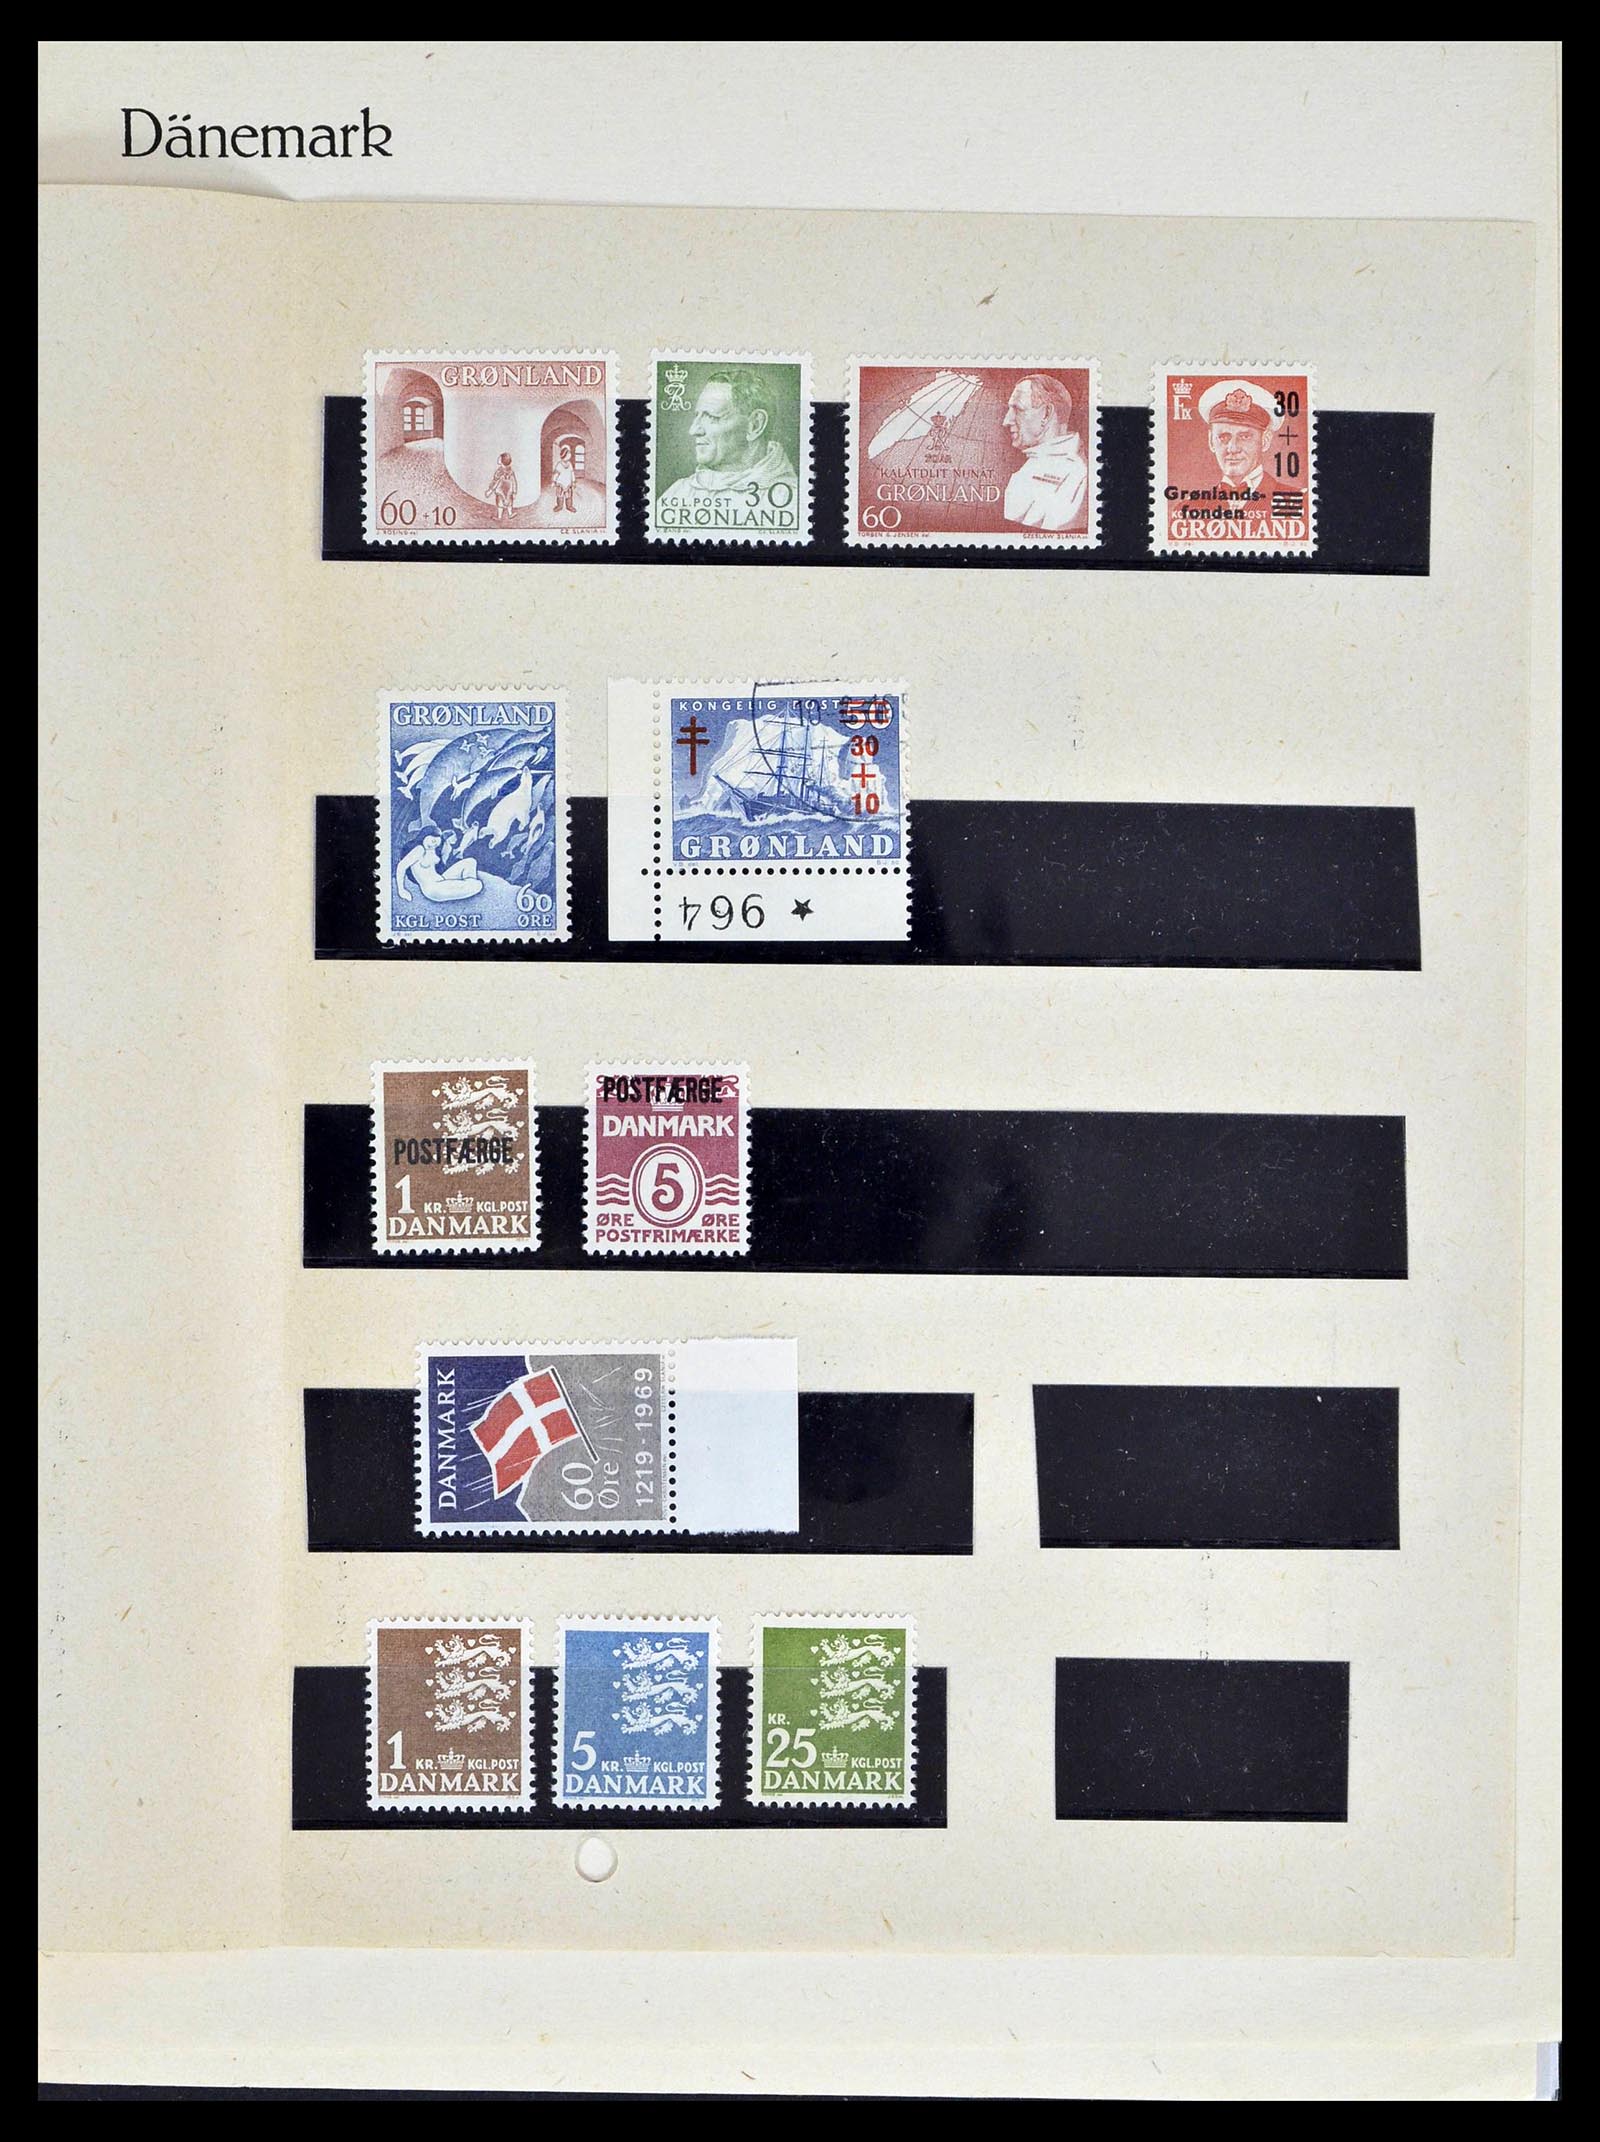 39407 0038 - Stamp collection 39407 Denmark 1851-1969.